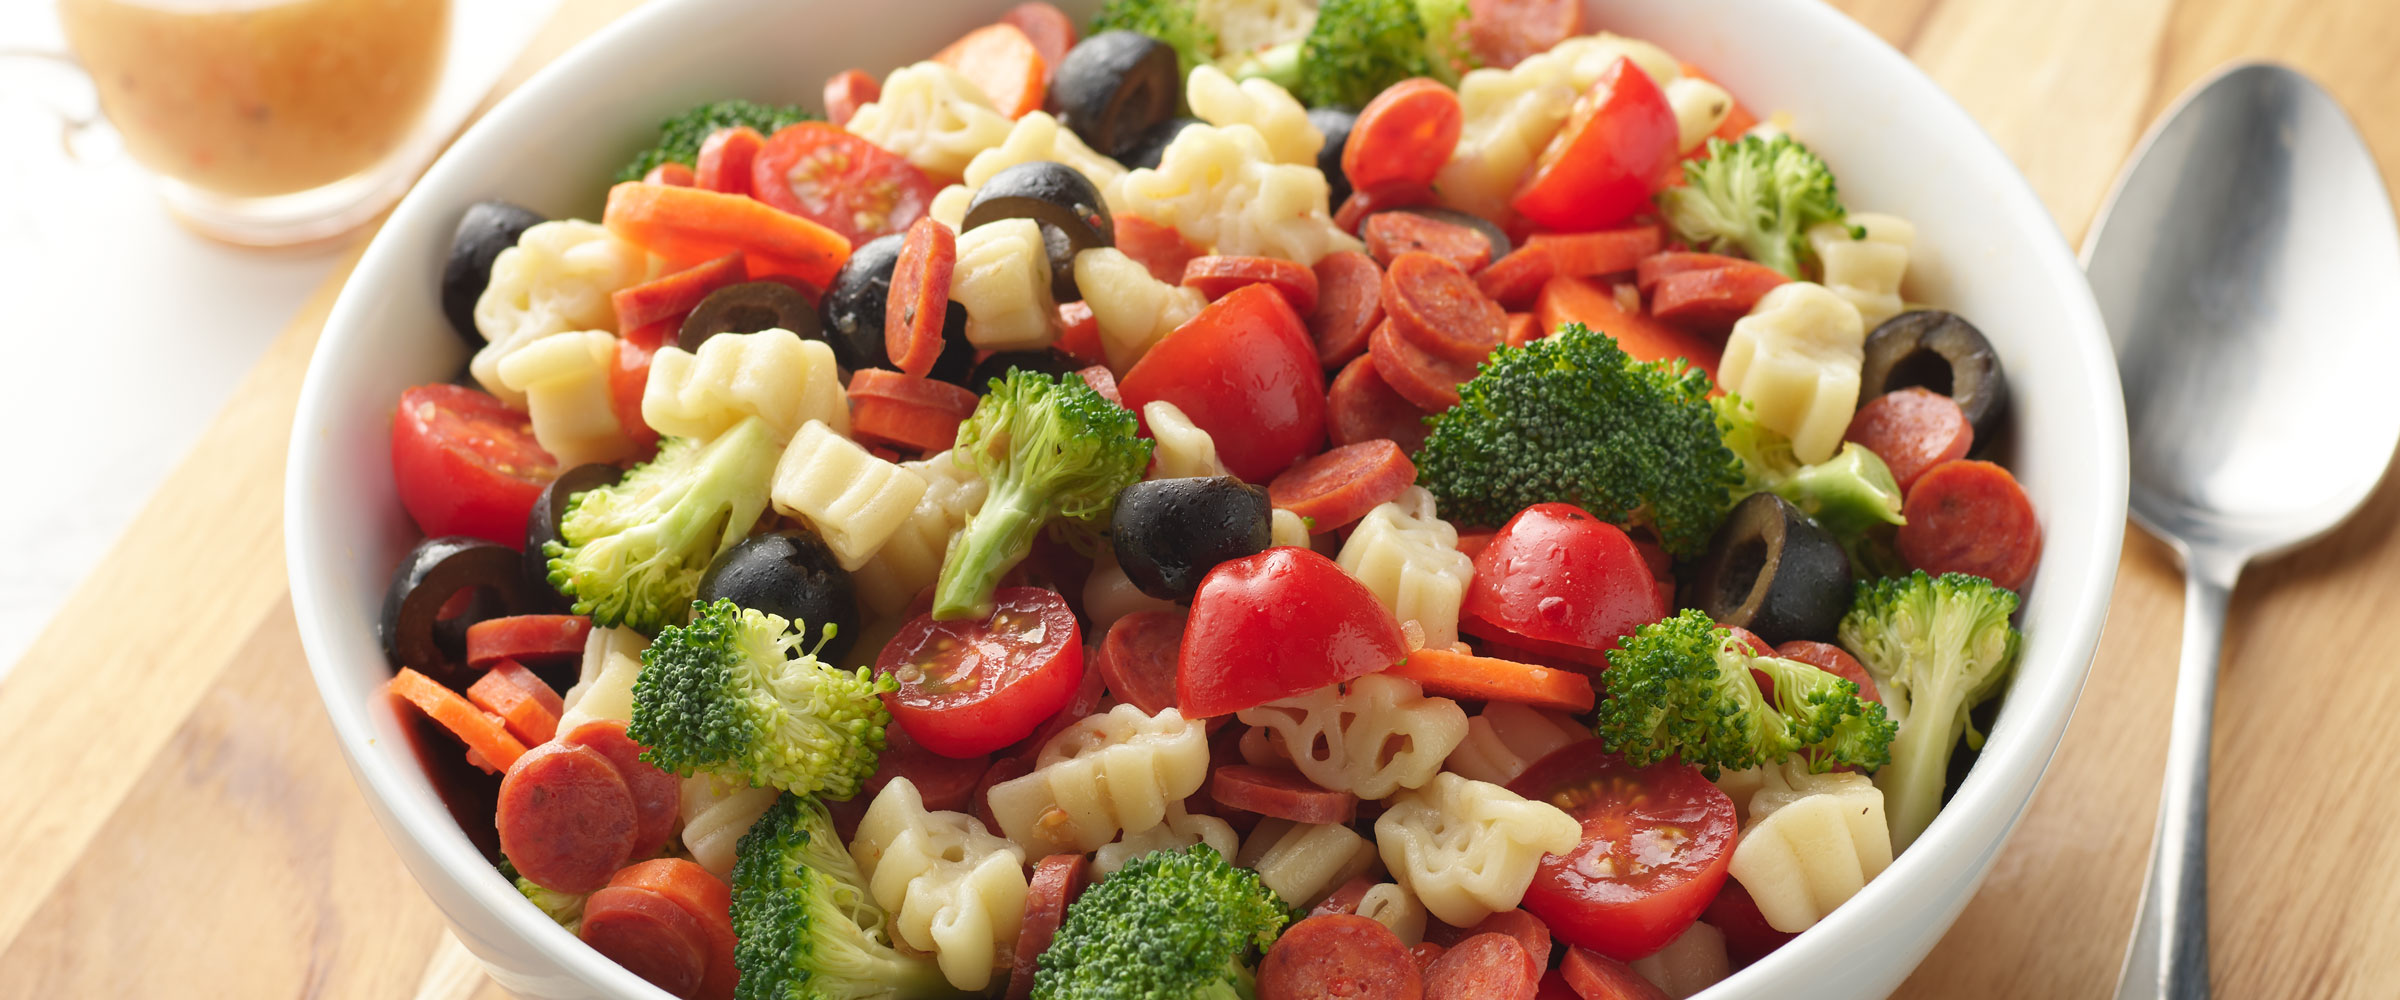 Dinosaur Pasta Salad with tomatoes and broccoli in white bowl